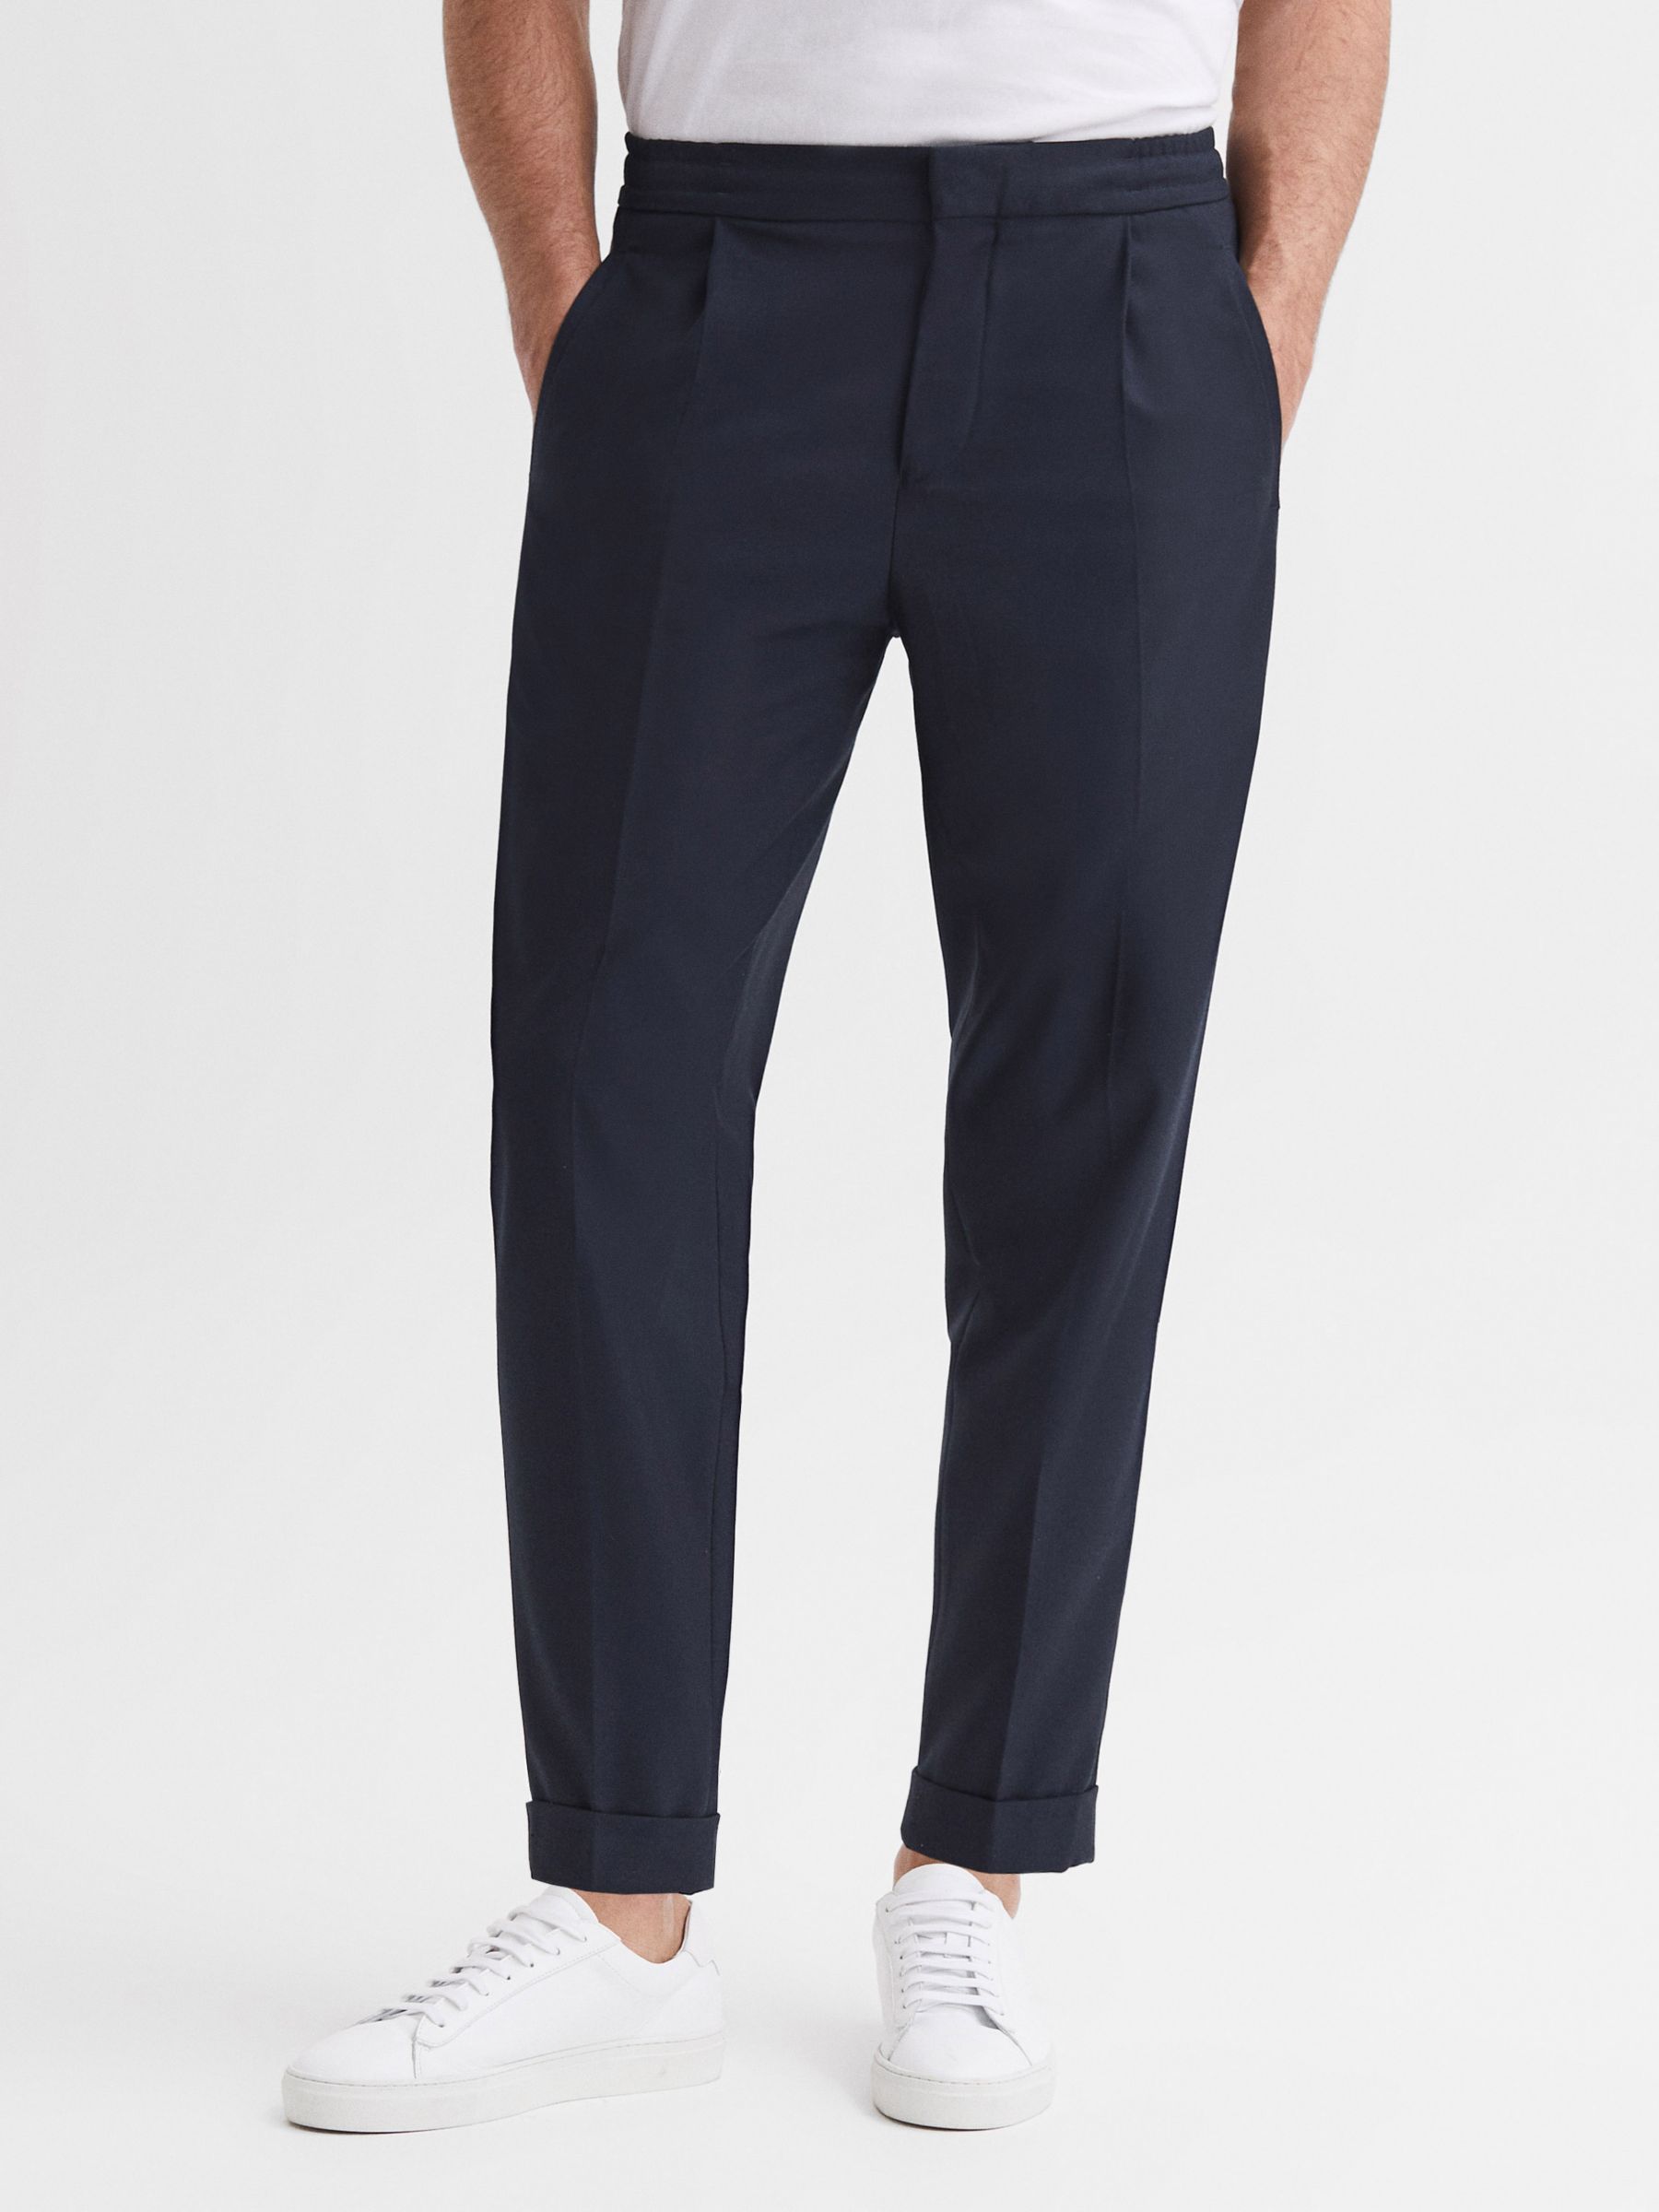 Reiss Brighton Pleated Relaxed Trousers, Navy at John Lewis & Partners